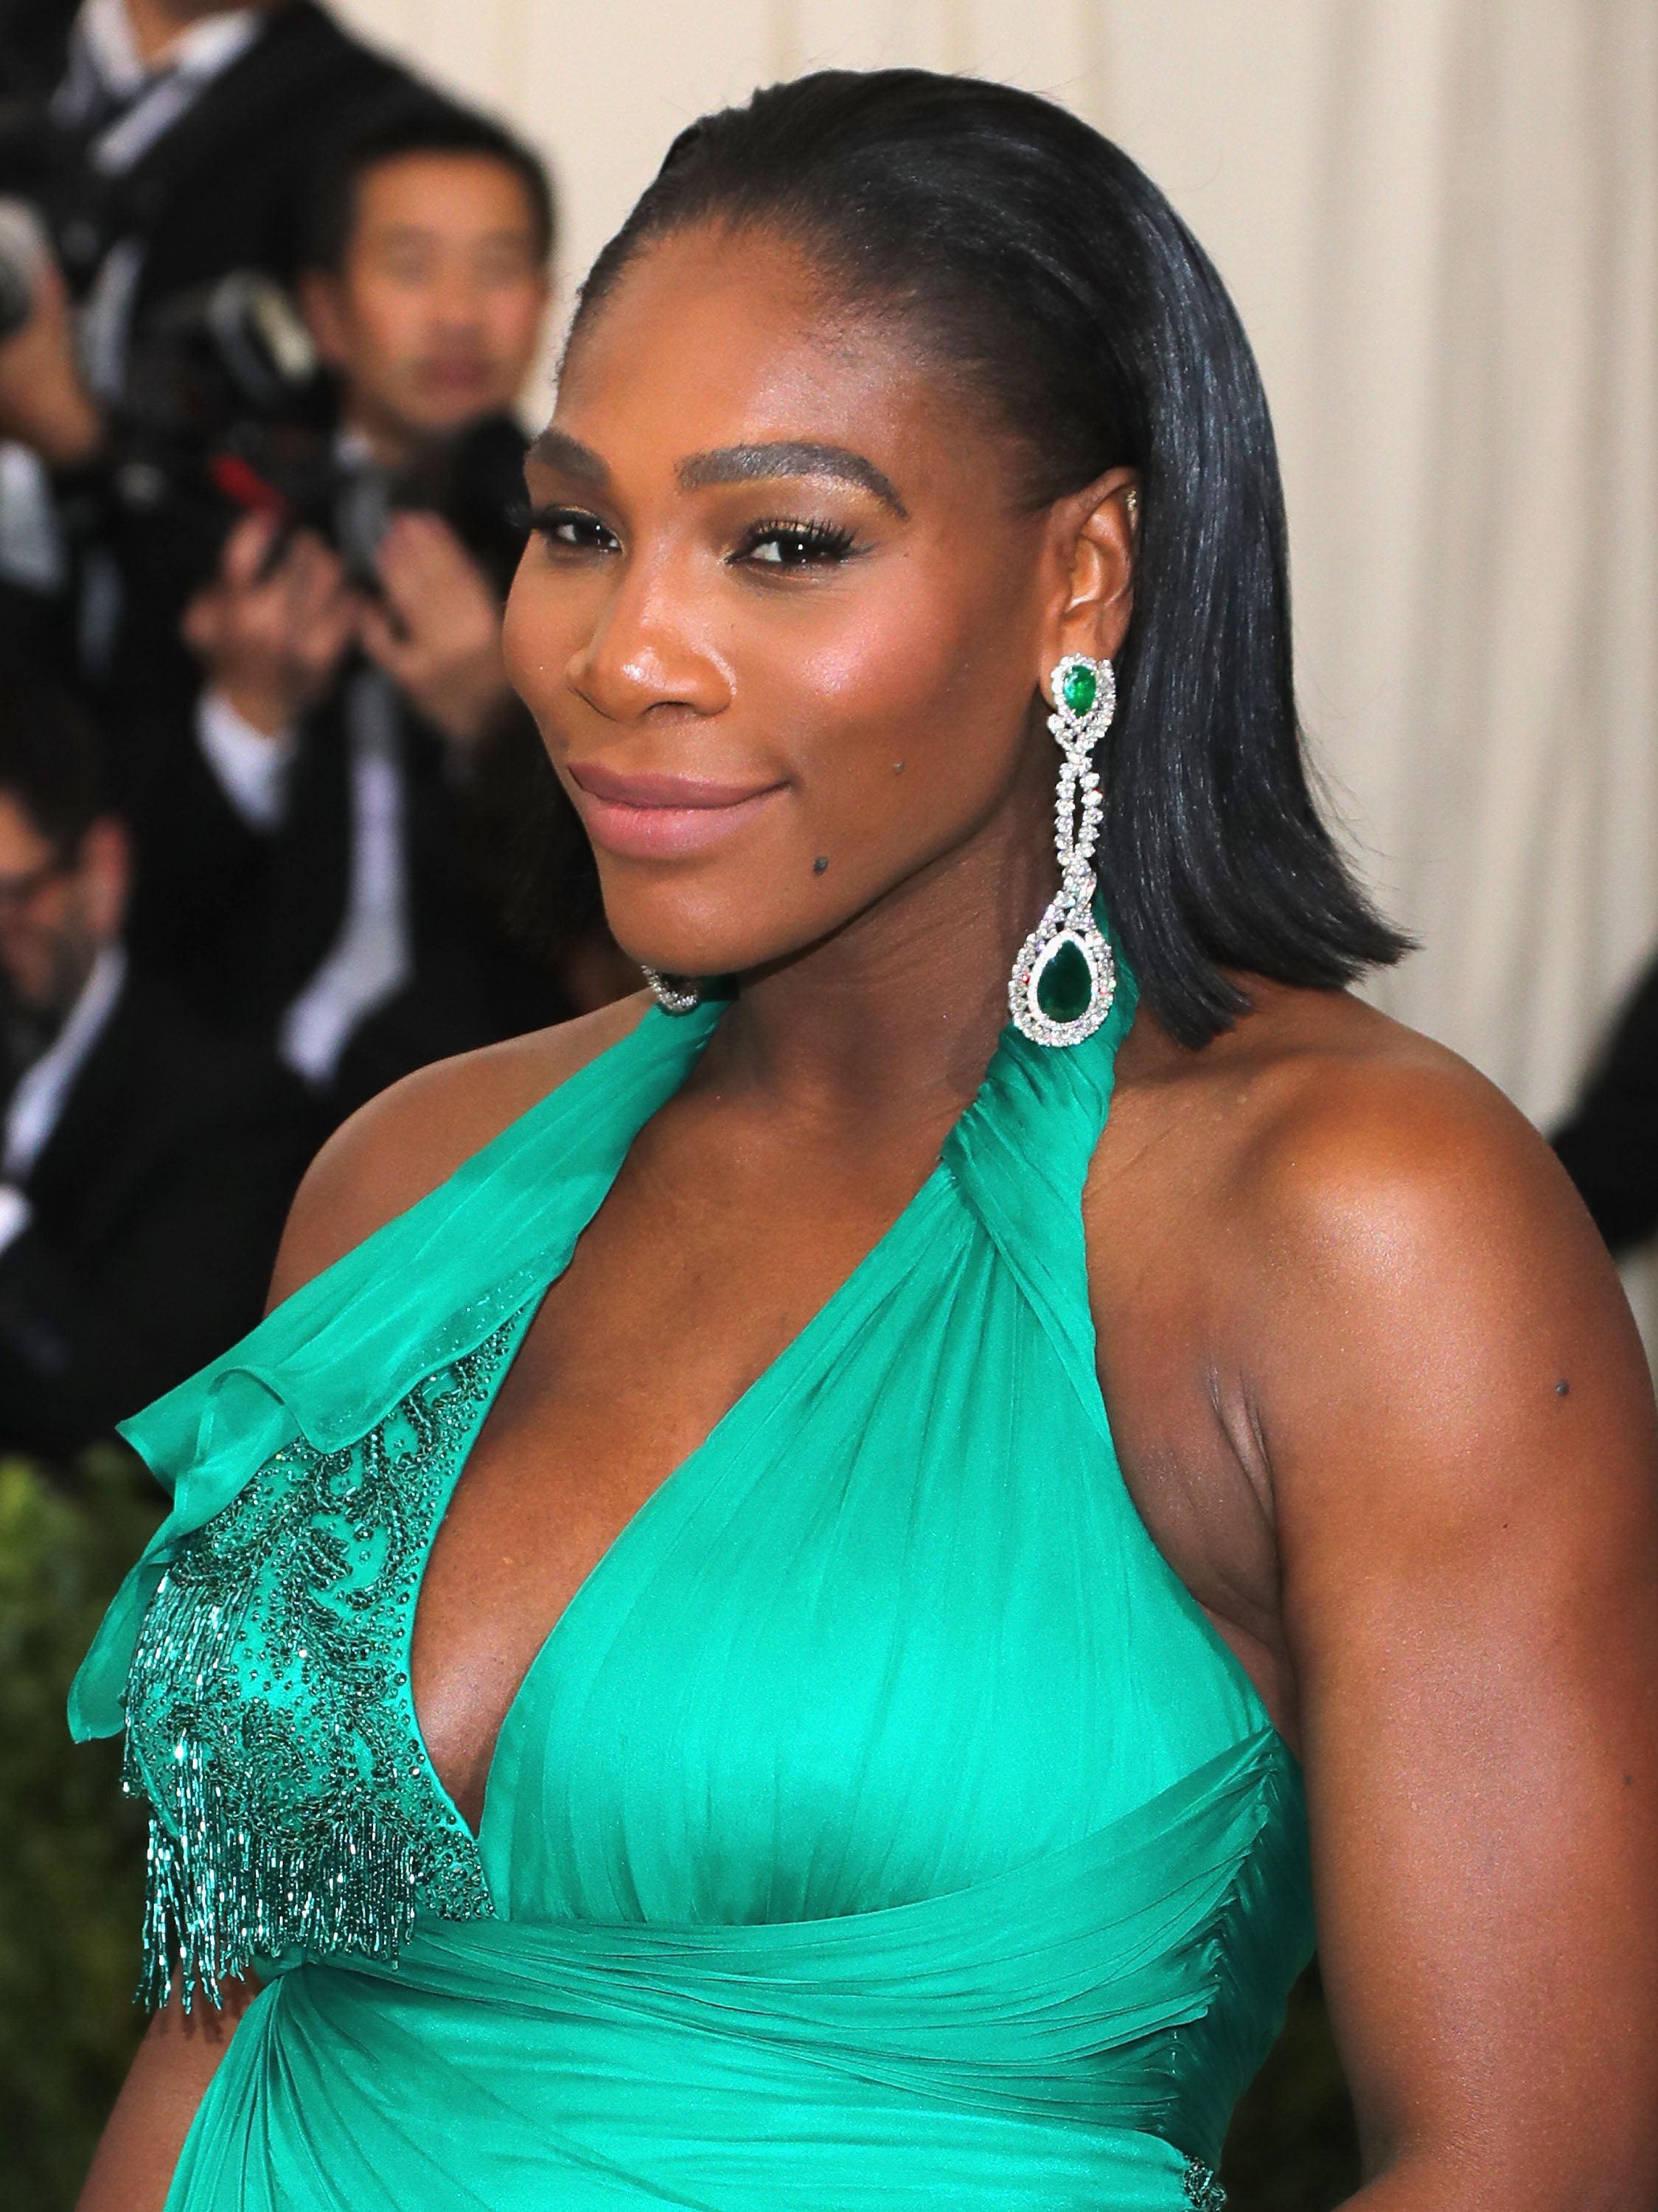 Tennis Star Serena Williams Joins This Tech Company's Board
